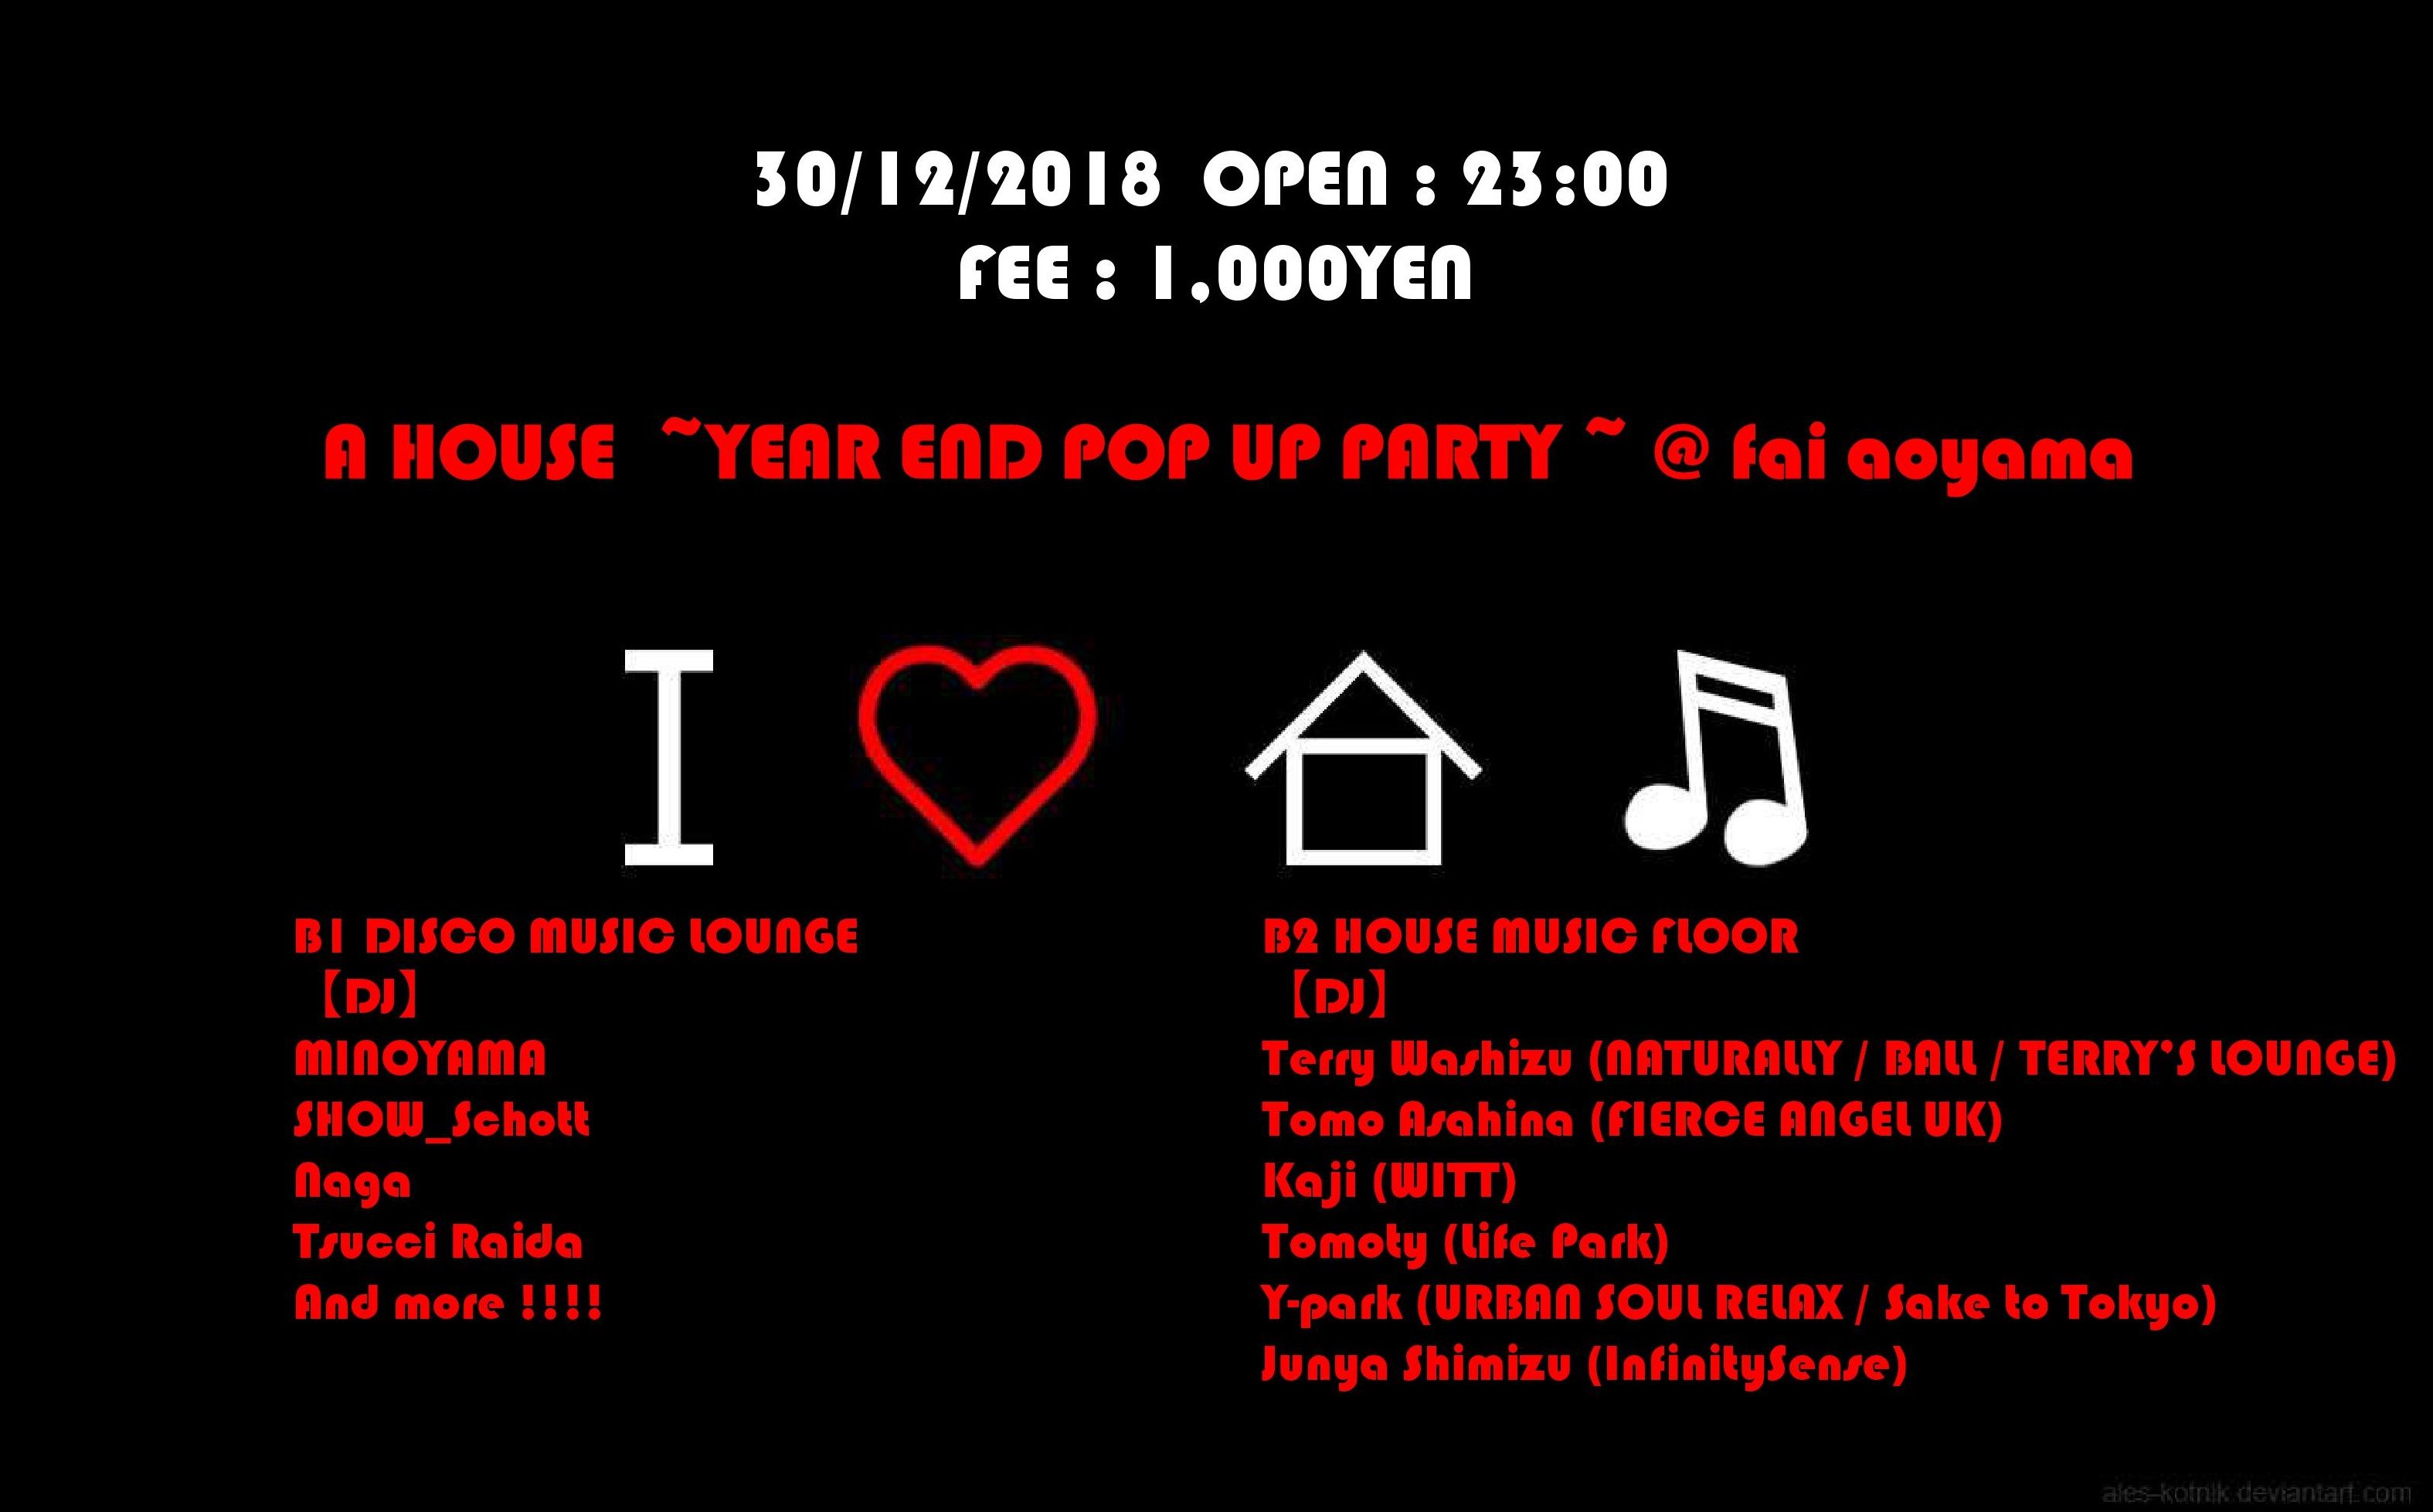 A HOUSE ~YEAR END POP UP PARTY ~